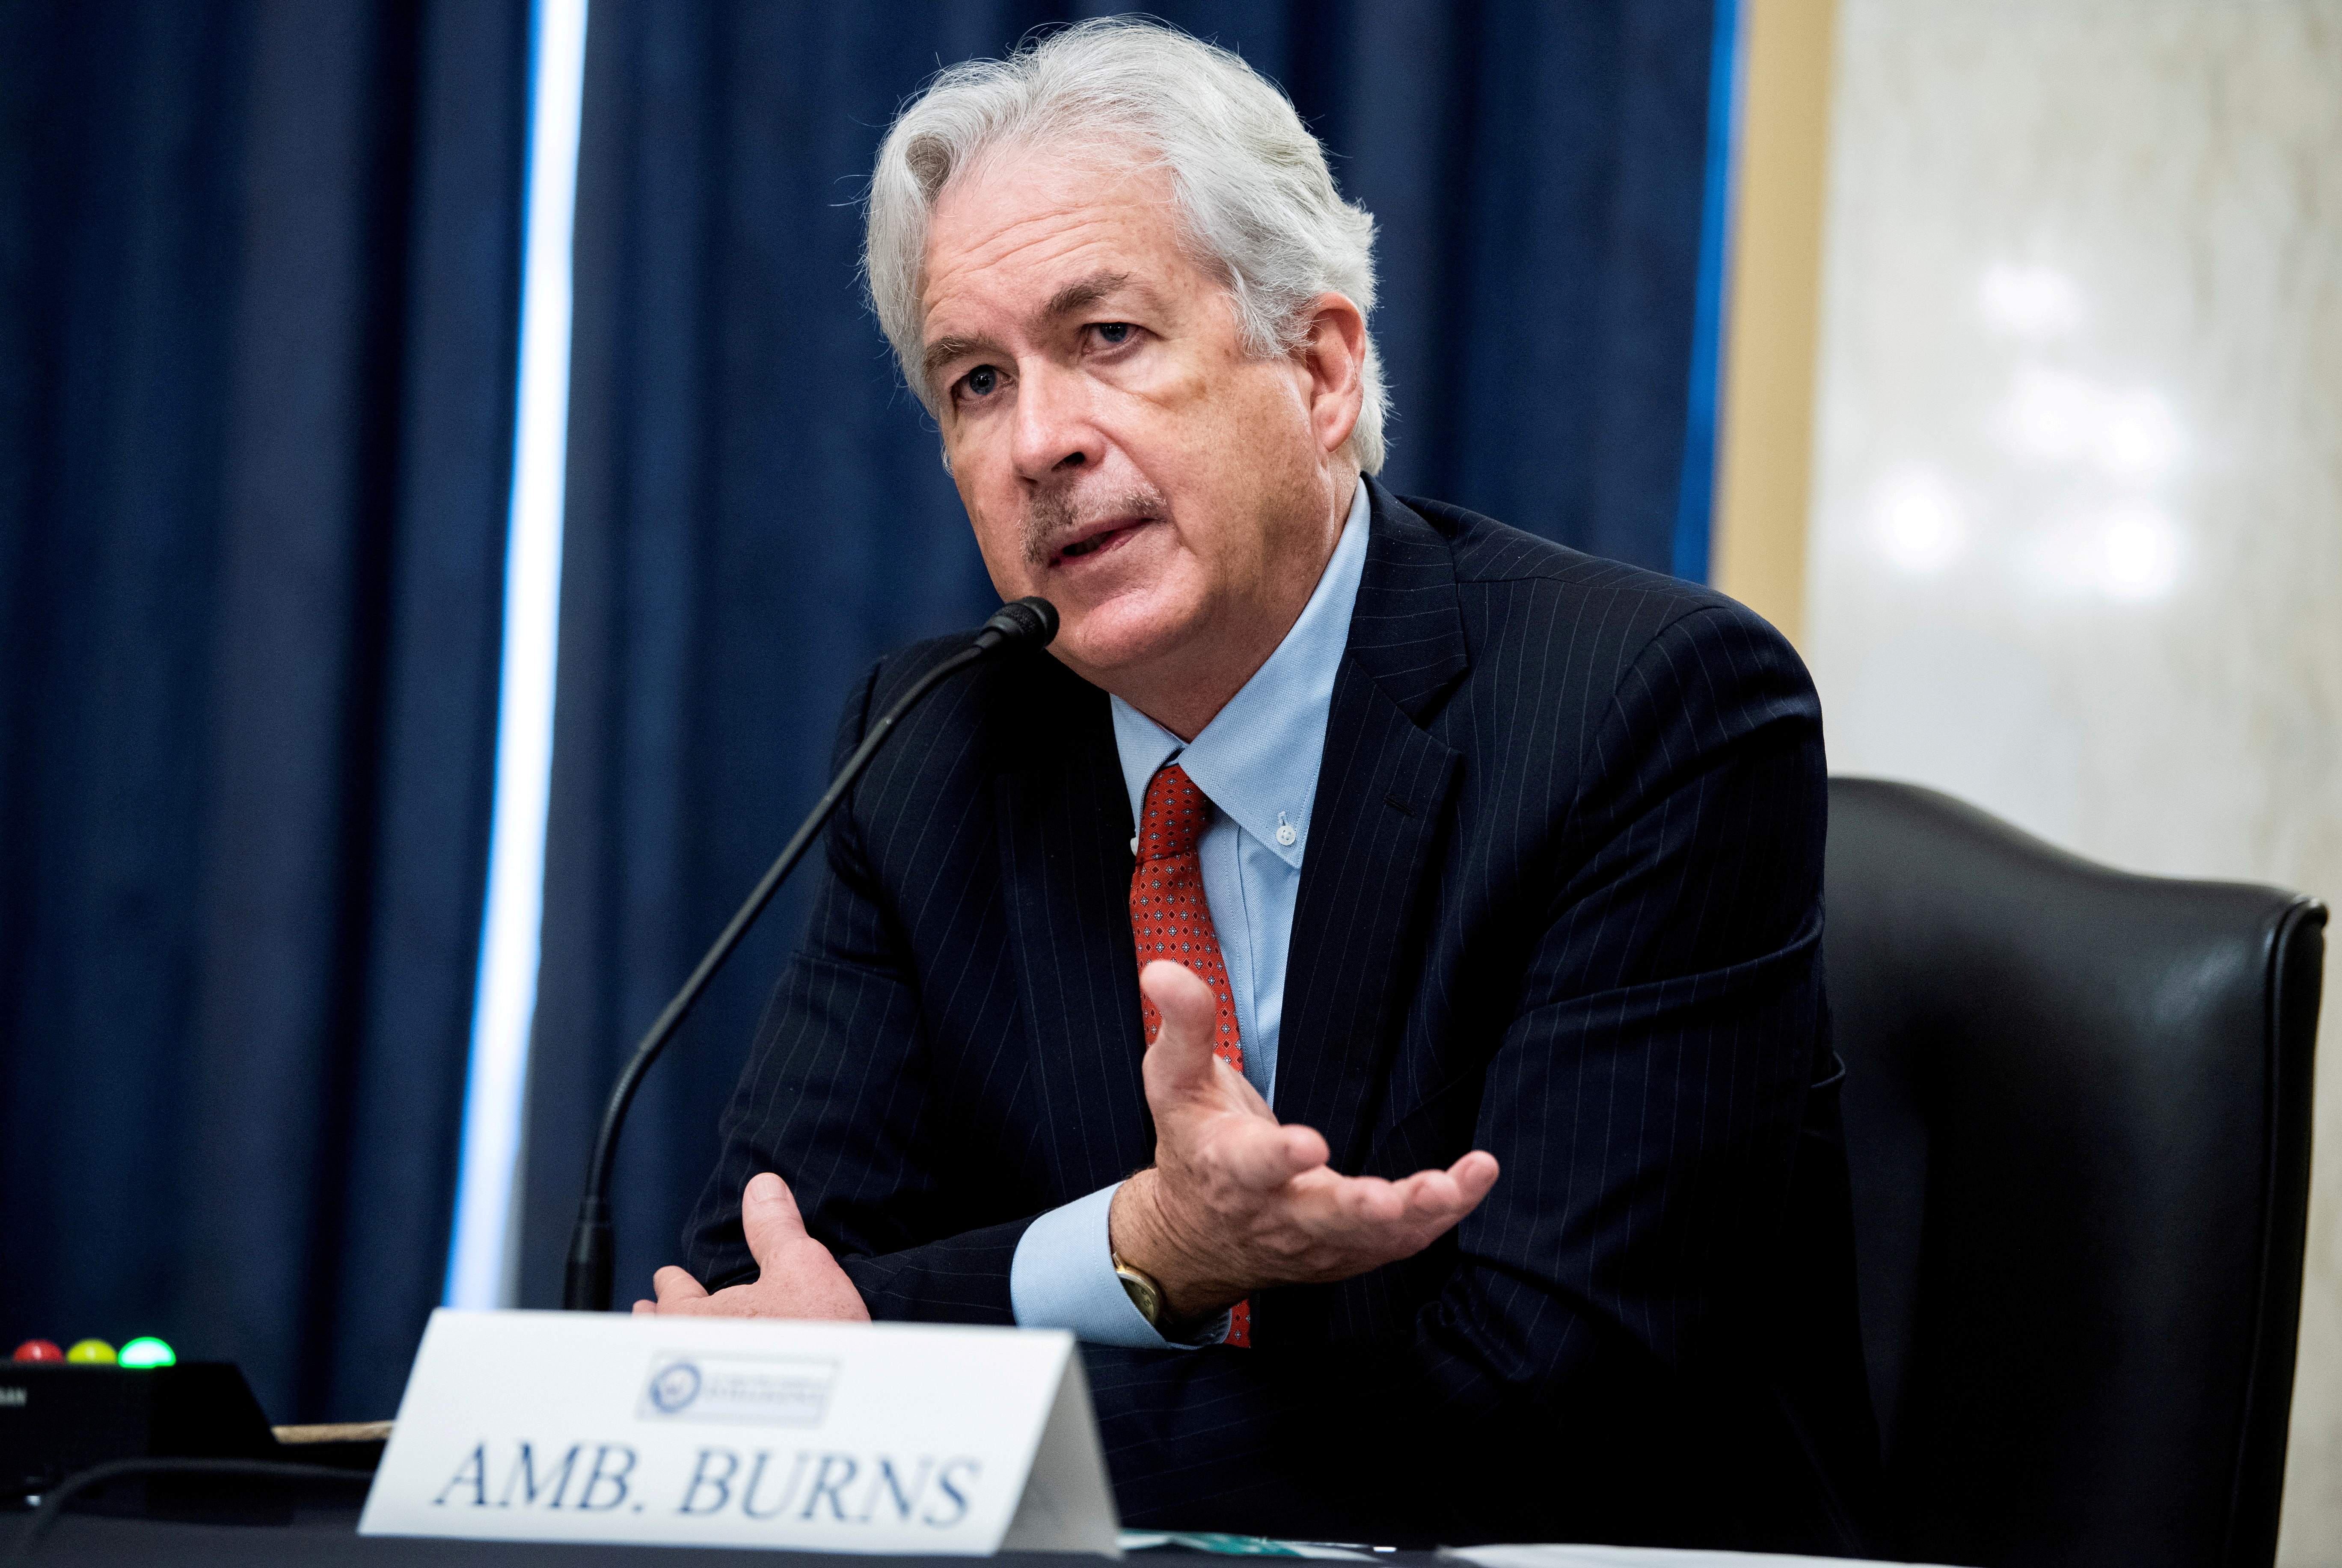 William Burns testifies during a Senate Intelligence Committee hearing for his nomination as Central Intelligence Agency (CIA) director